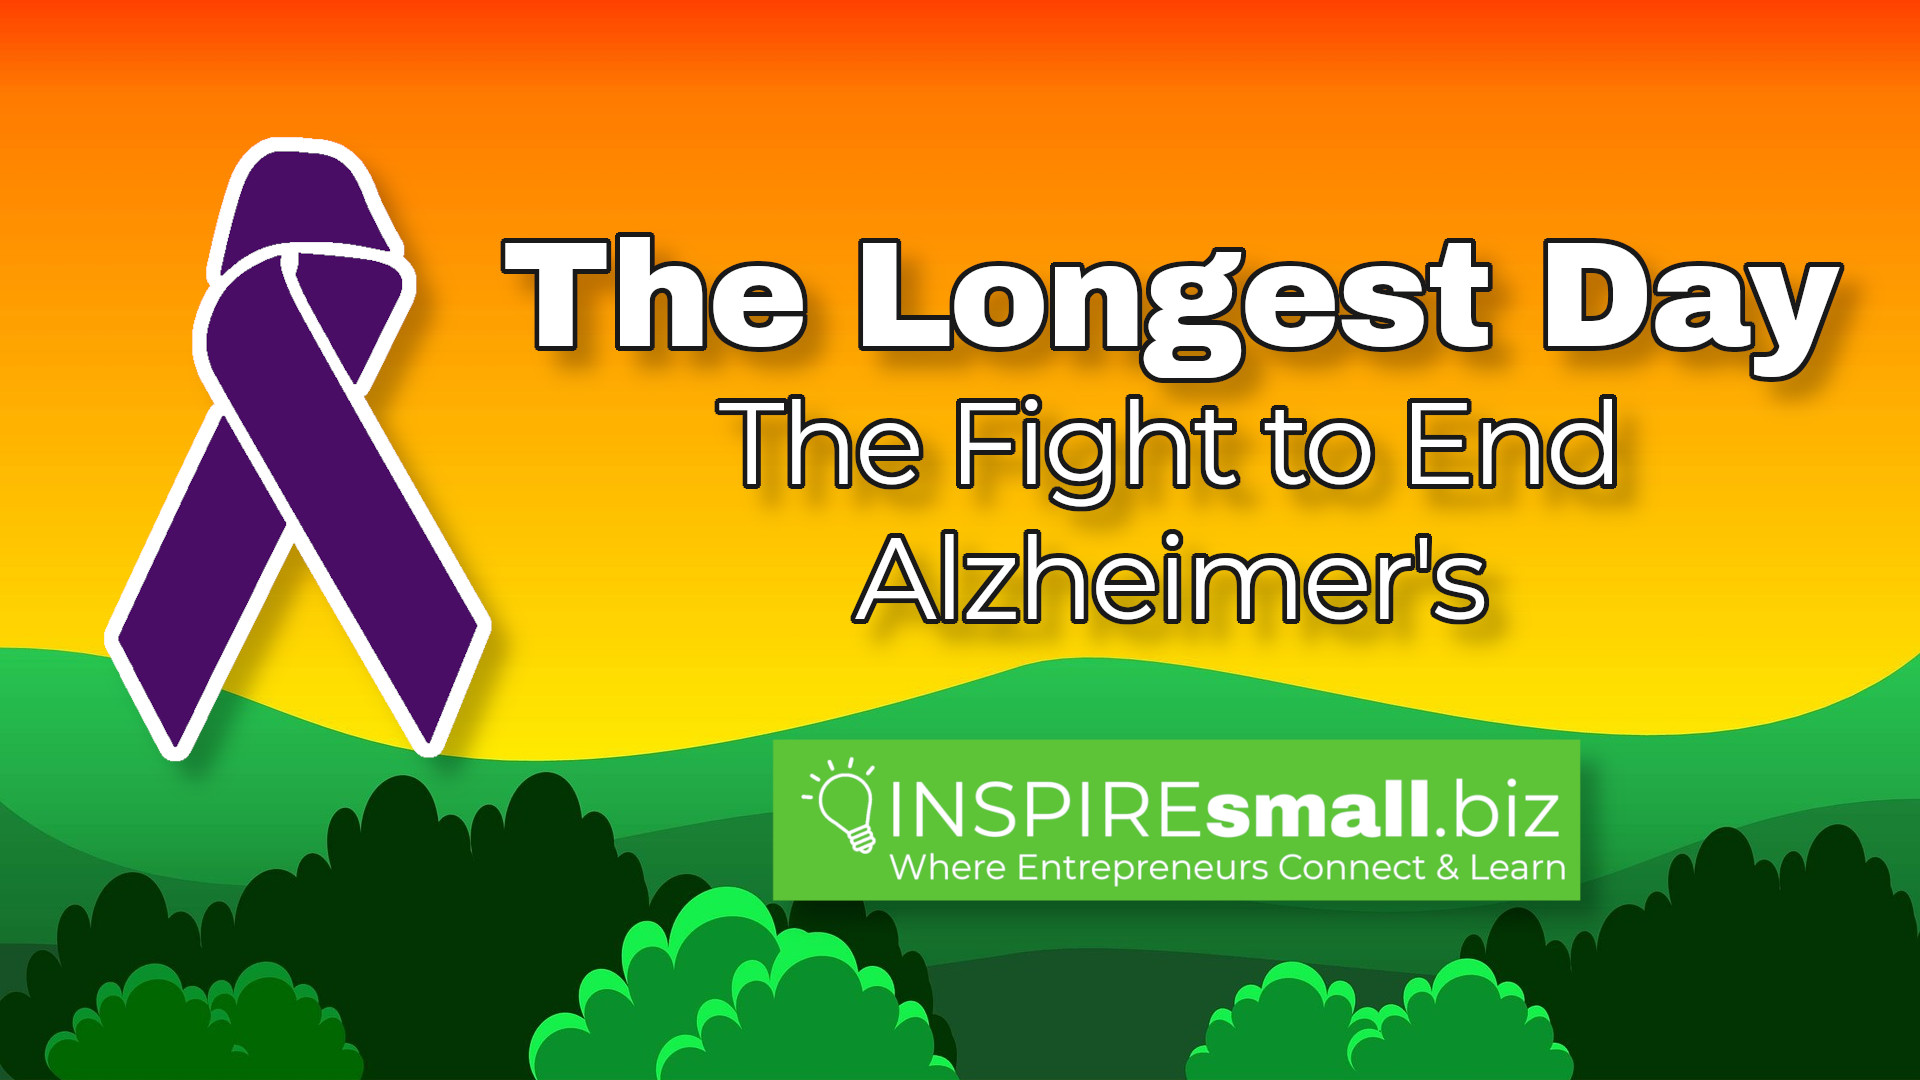 The Longest Day - The fight to End Alzheimer's with Jennifer Buddenbaum from the Alzheimer's Association speakers at todays meeting.